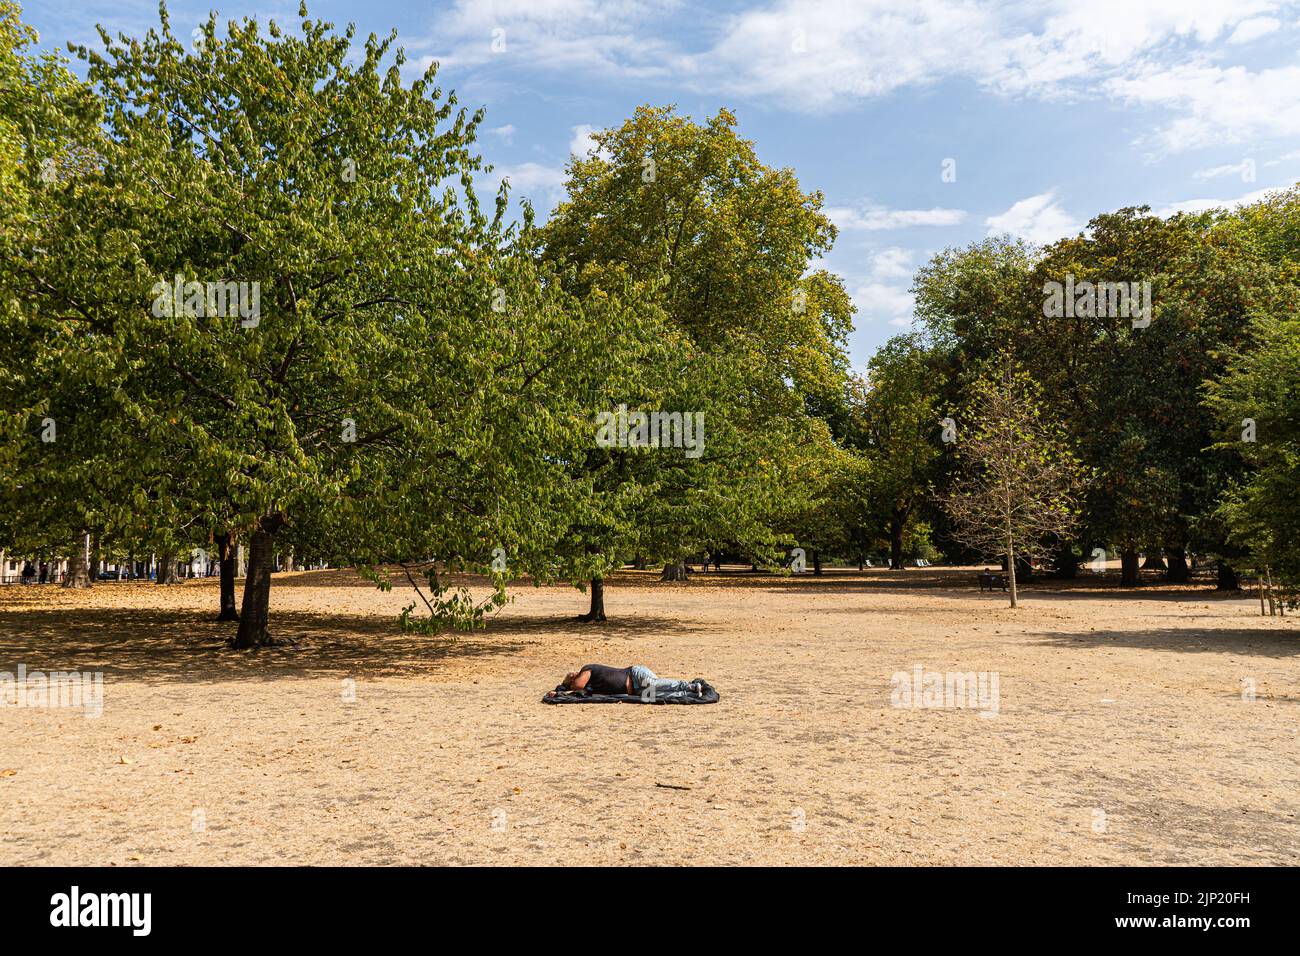 London, UK. 15 August 2022 . A man sleeps on the parched grass in Saint James park  after the driest summer for fifty years, a drought has been declared for some areas of England including Devon, Cornwall, Kent, London and the East Midlands. According to the Environment Agency, the total stock of water in England's reservoirs was 65 percent of its normal capacity at the end of July.Credit. amer ghazzal/Alamy Live News Stock Photo